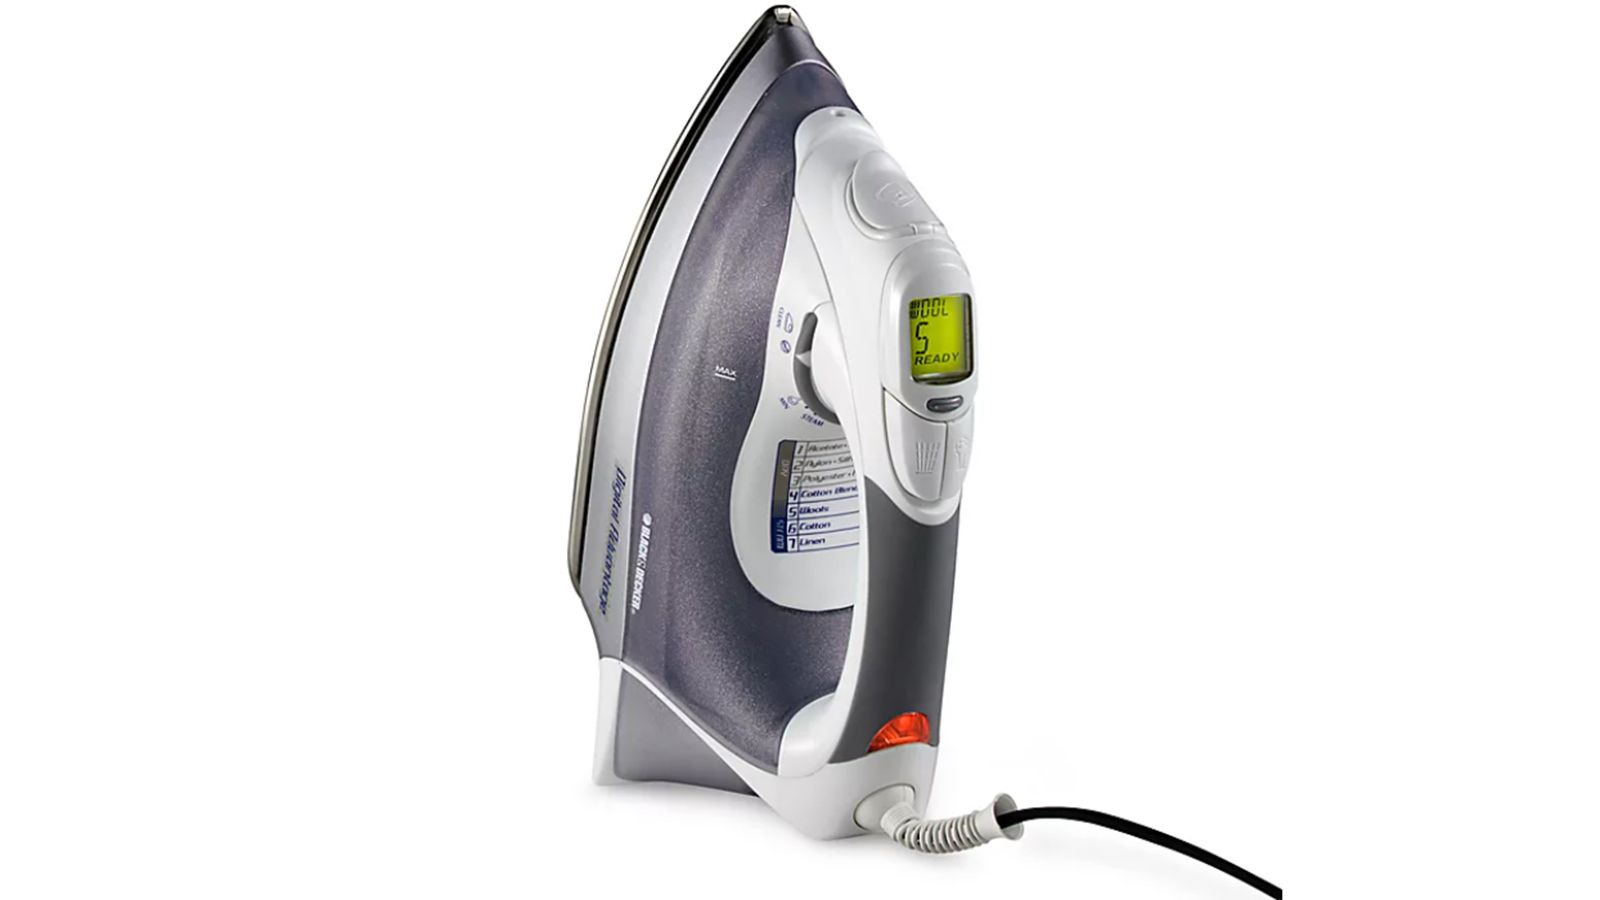 Steam Iron v/s Dry Iron: Let's End The Debate!